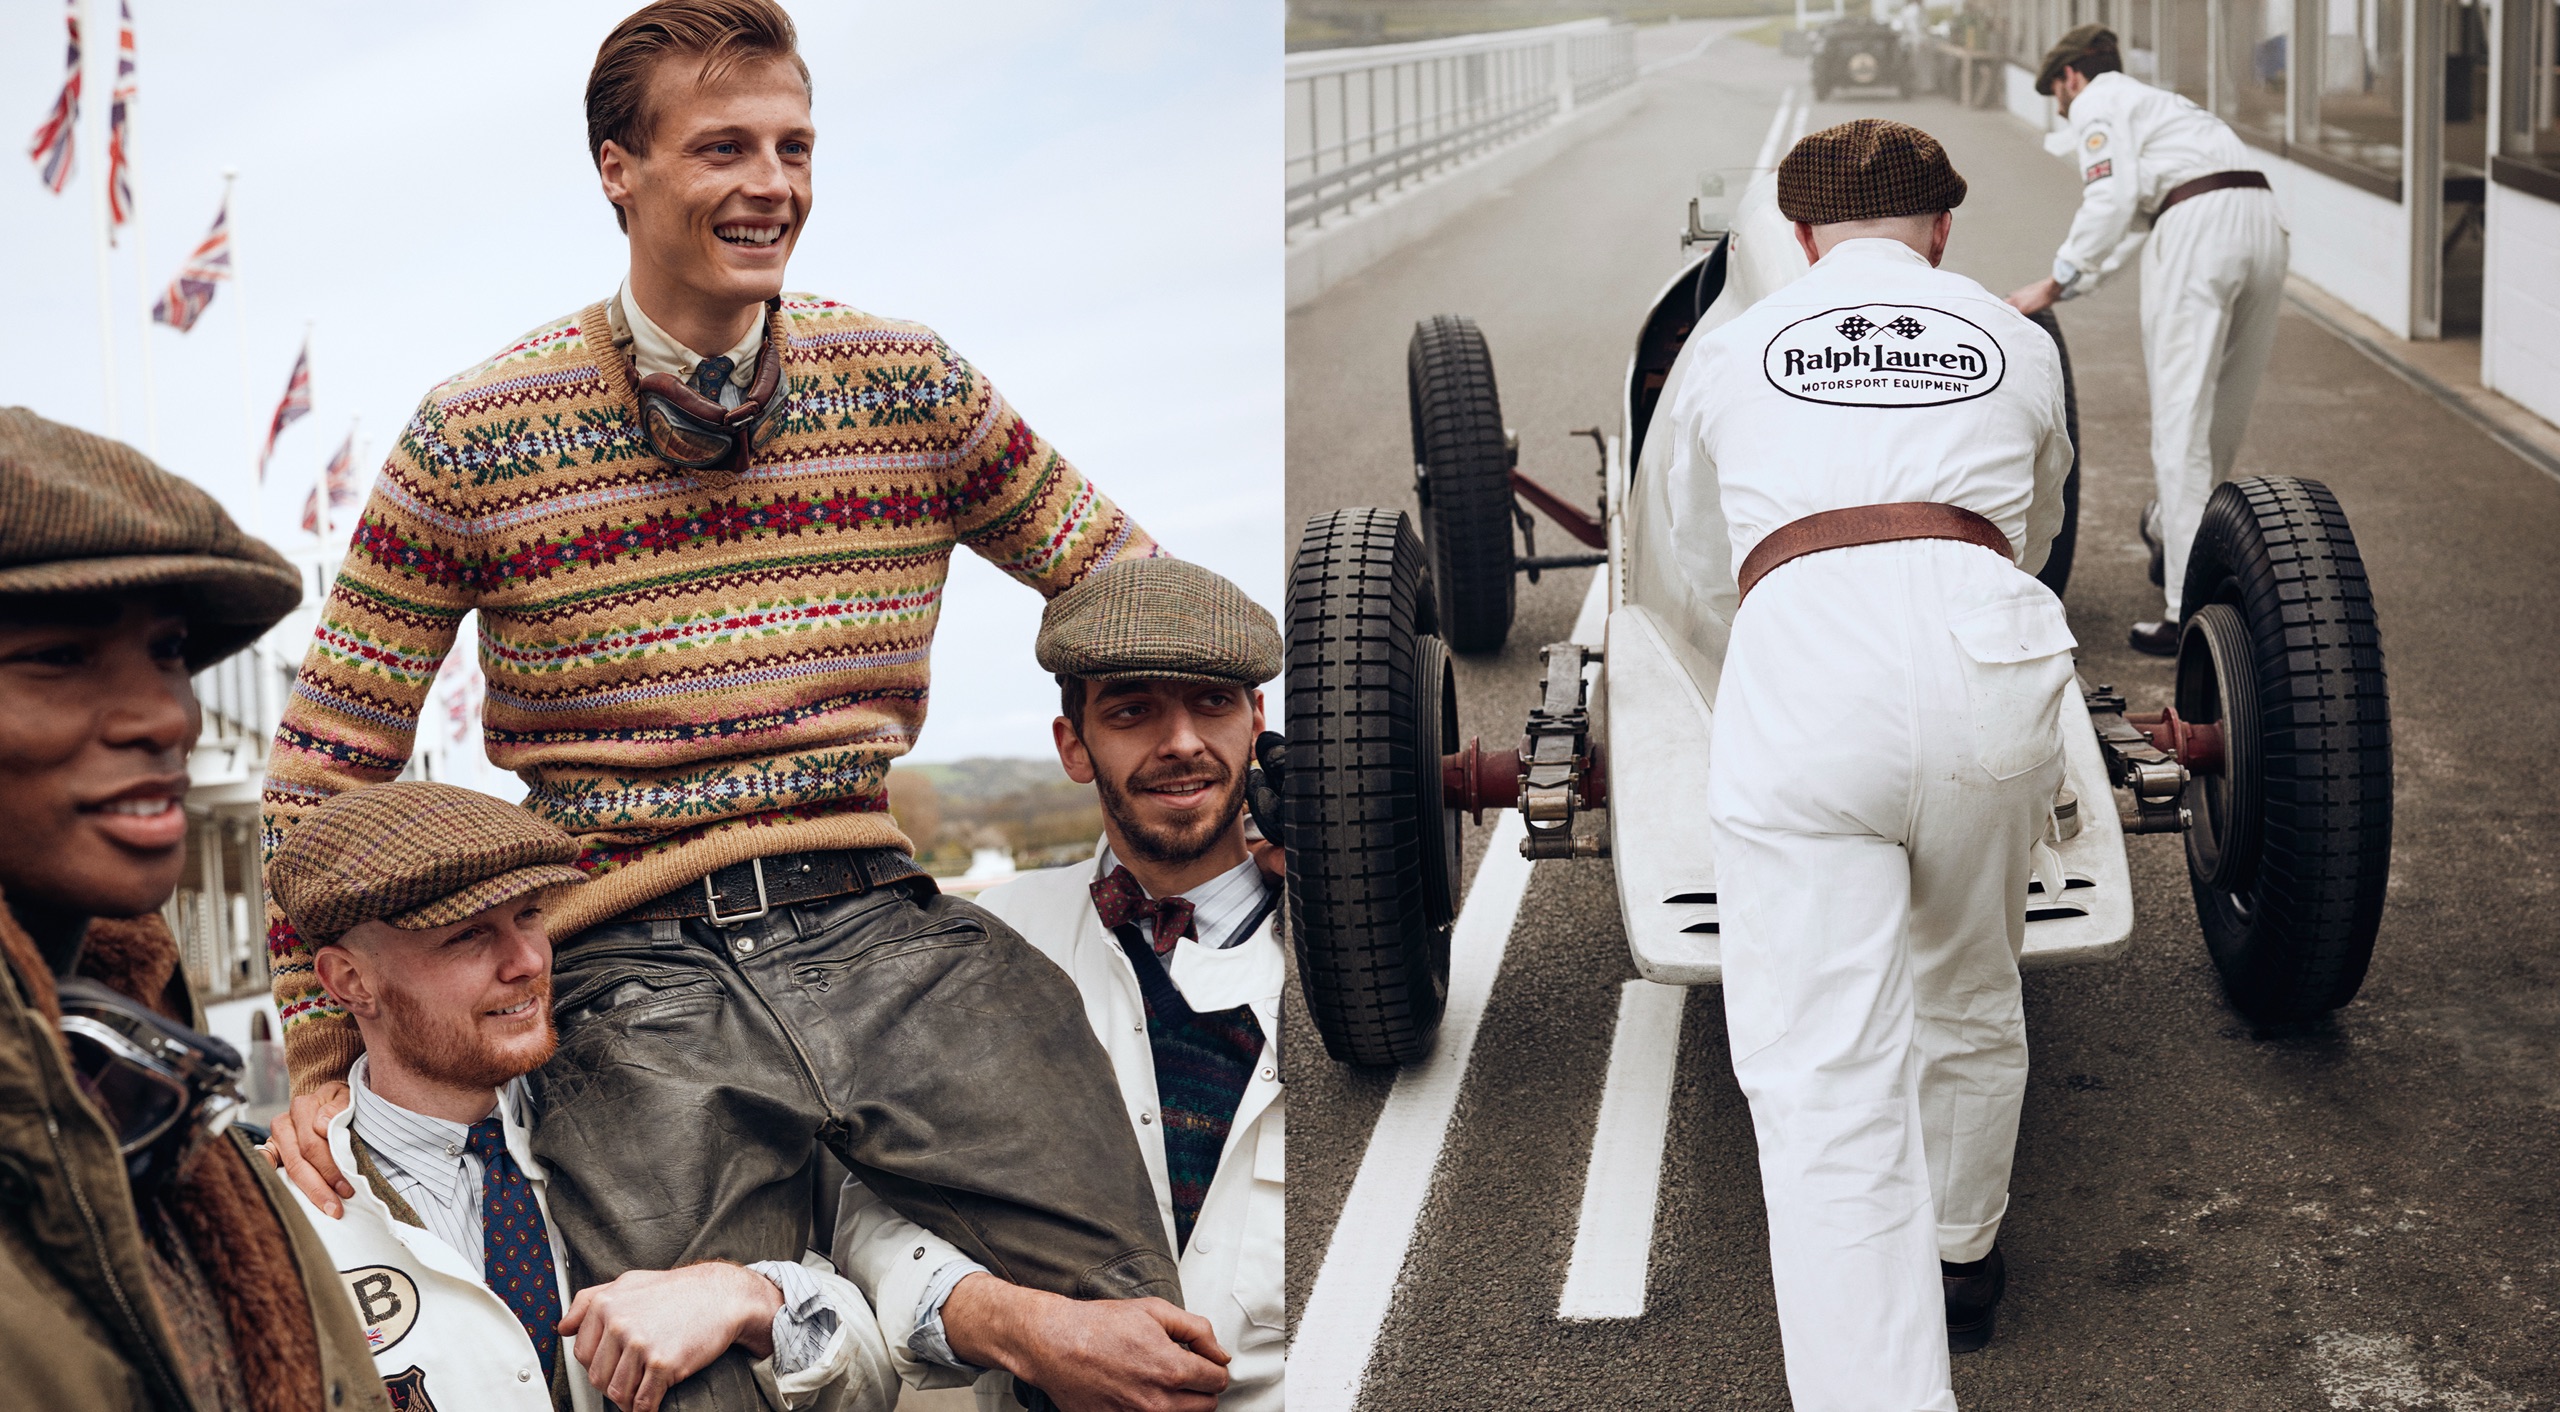 <strong>ON LOCATION</strong><br/><span>This season of Polo Originals, inspired by the golden era of Grand Prix car racing, was photographed at the Goodwood Motor Circuit, which is located in West Sussex, on the 12,000-acre Goodwood Estate. The Circuit has since become known for hosting a number of prestigious motorsport events, including the famous Festival of Speed and Revival.</span> <br/><rlmag_link href="https://www.ralphlauren.co.uk/en/search?cgid=brands-prl-tough-and-refined-cg"><button class="shop-collection">Shop the Story</button></rlmag_link>